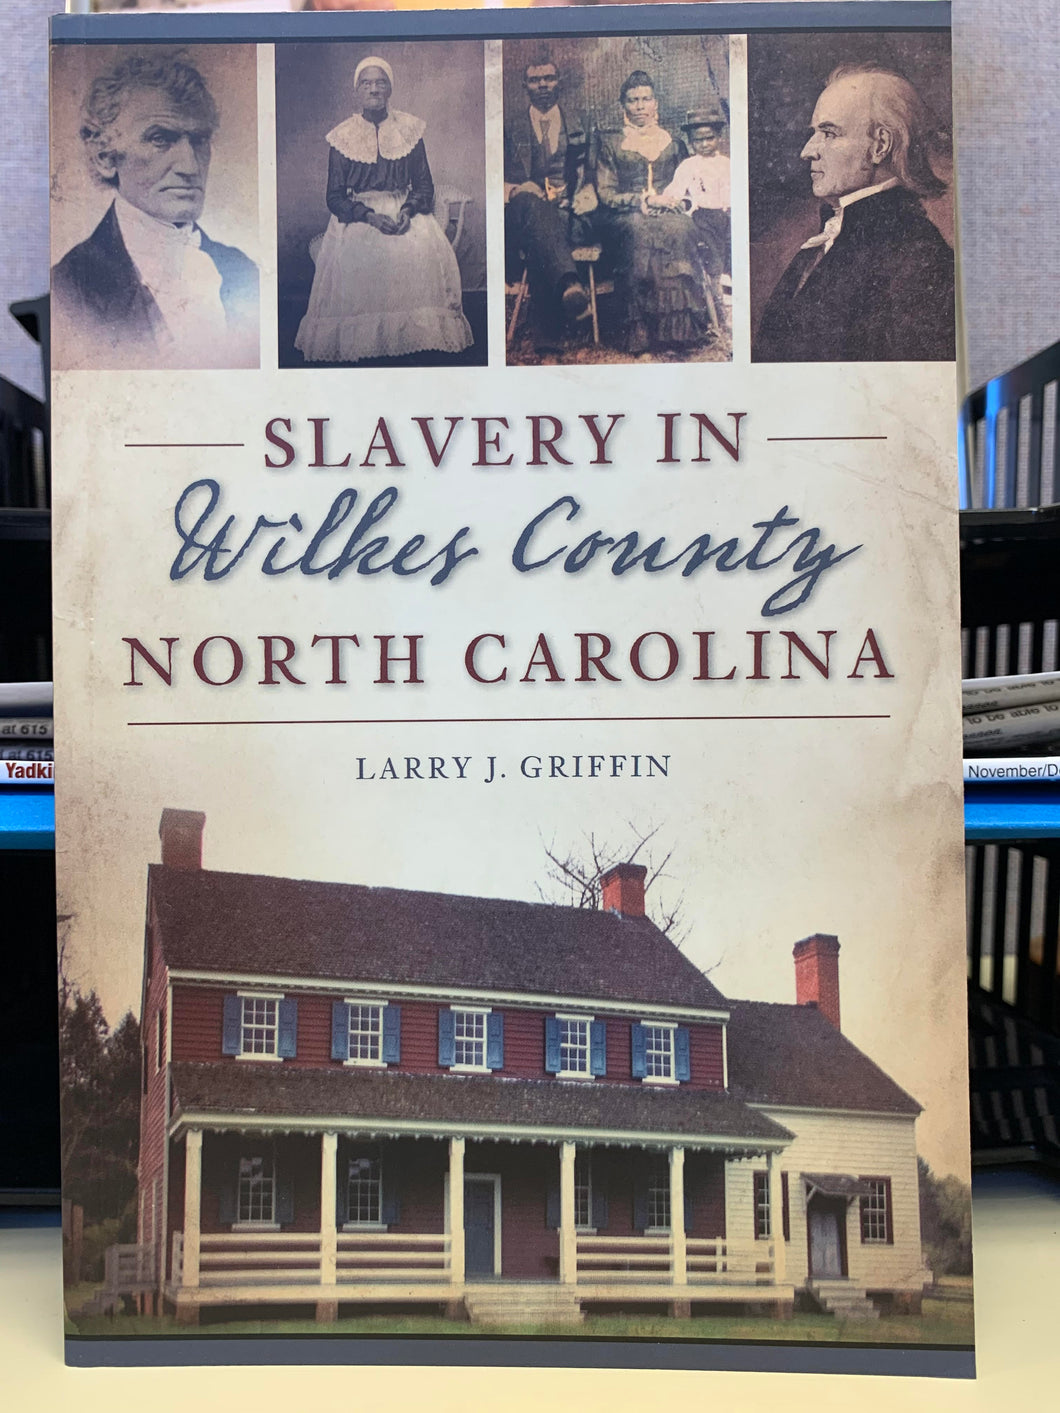 Slavery in Wilkes County North Carolina by Larry J. Griffin